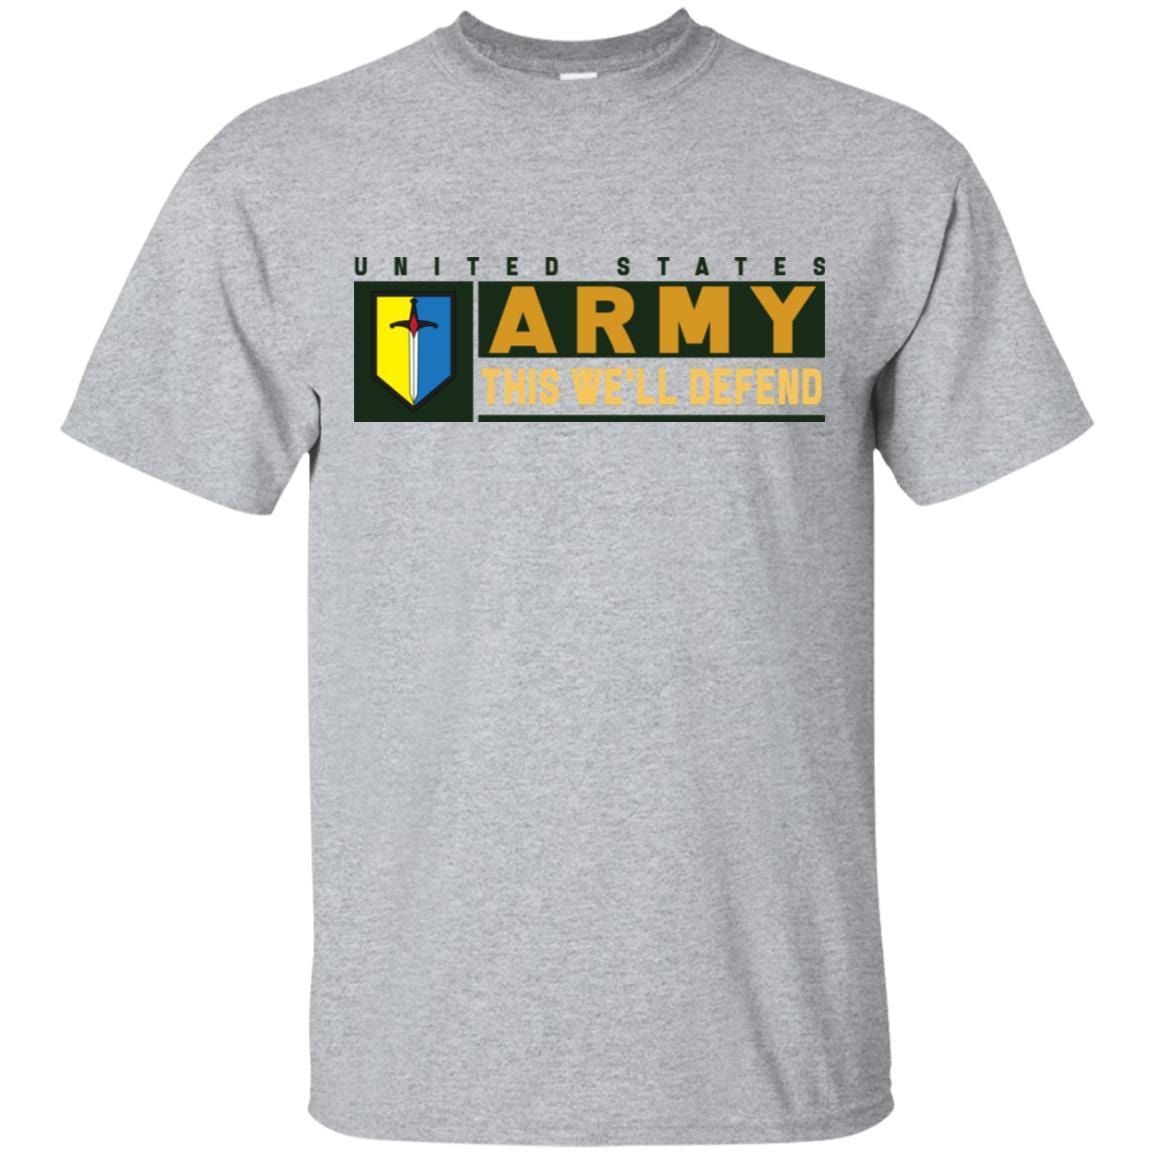 US Army 1ST MANEUVER ENHANCEMENT BRIGADE- This We'll Defend T-Shirt On Front For Men-TShirt-Army-Veterans Nation